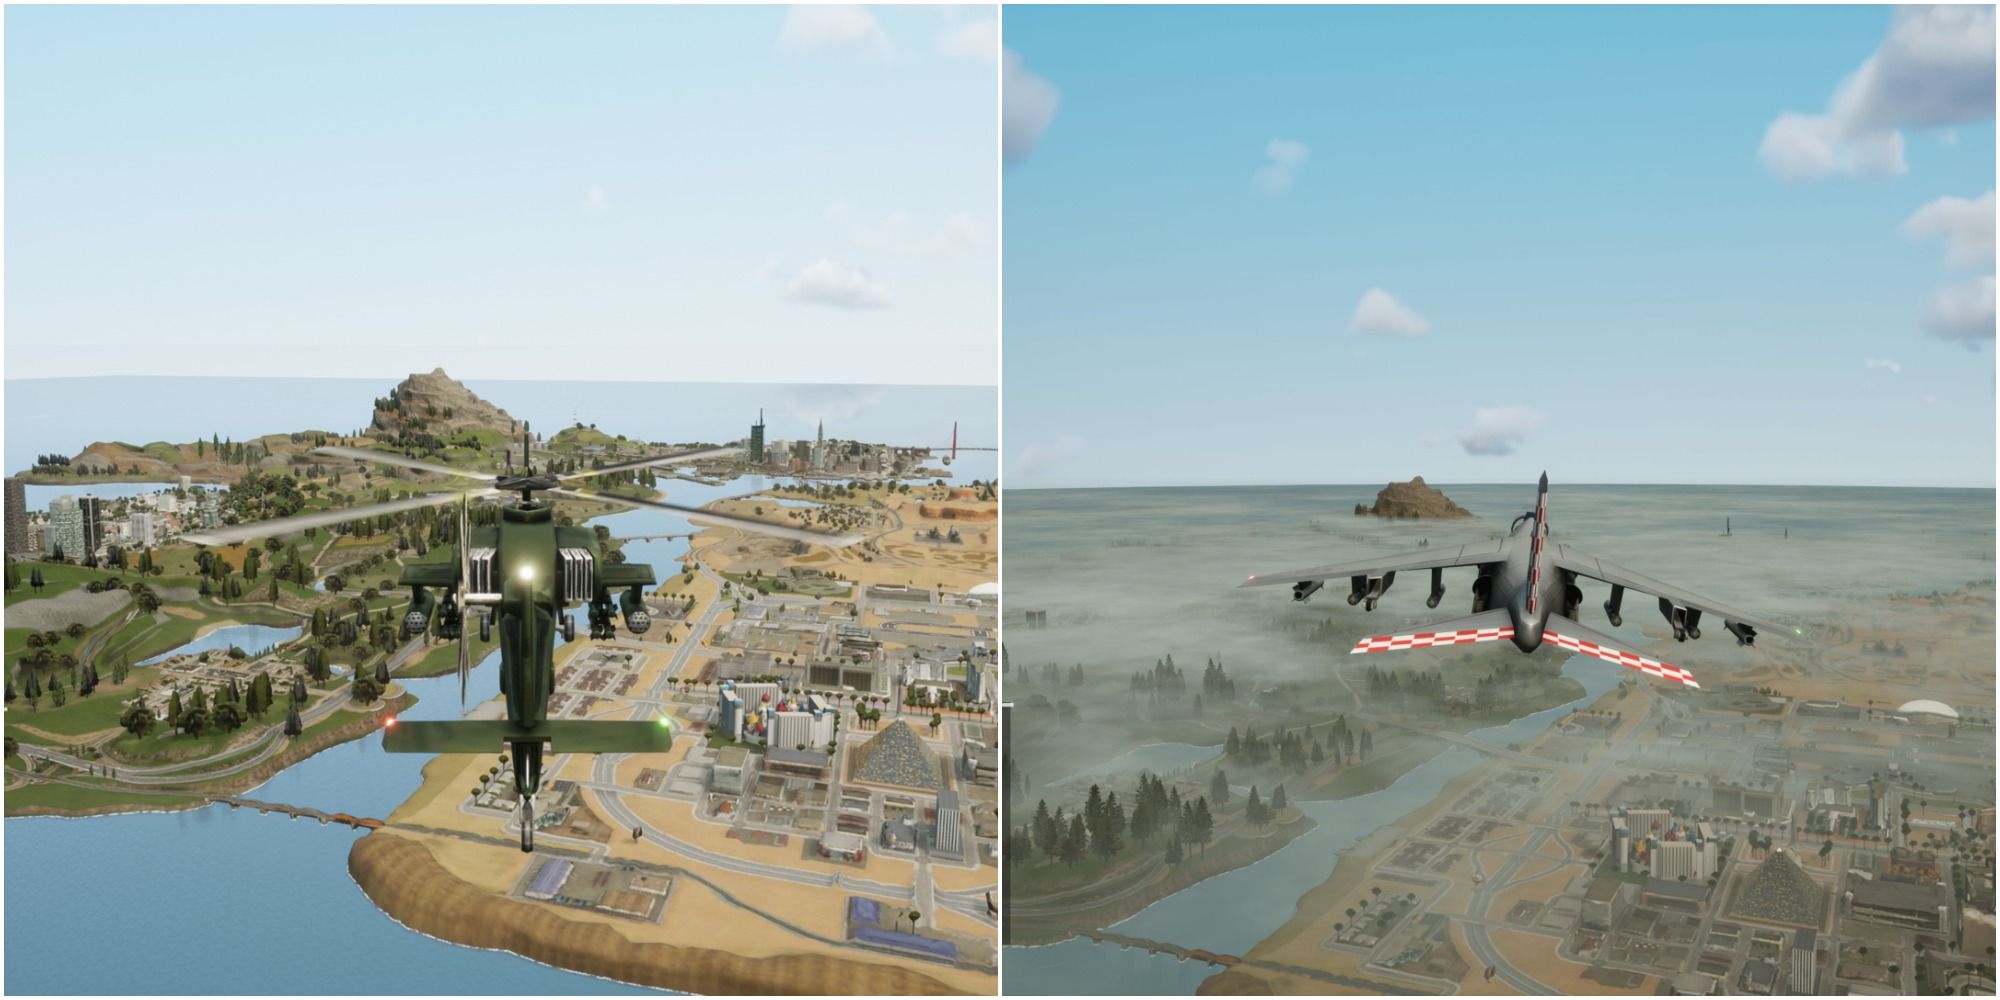 New GTA Trilogy update reintroduces the fog to San Andreas skyline